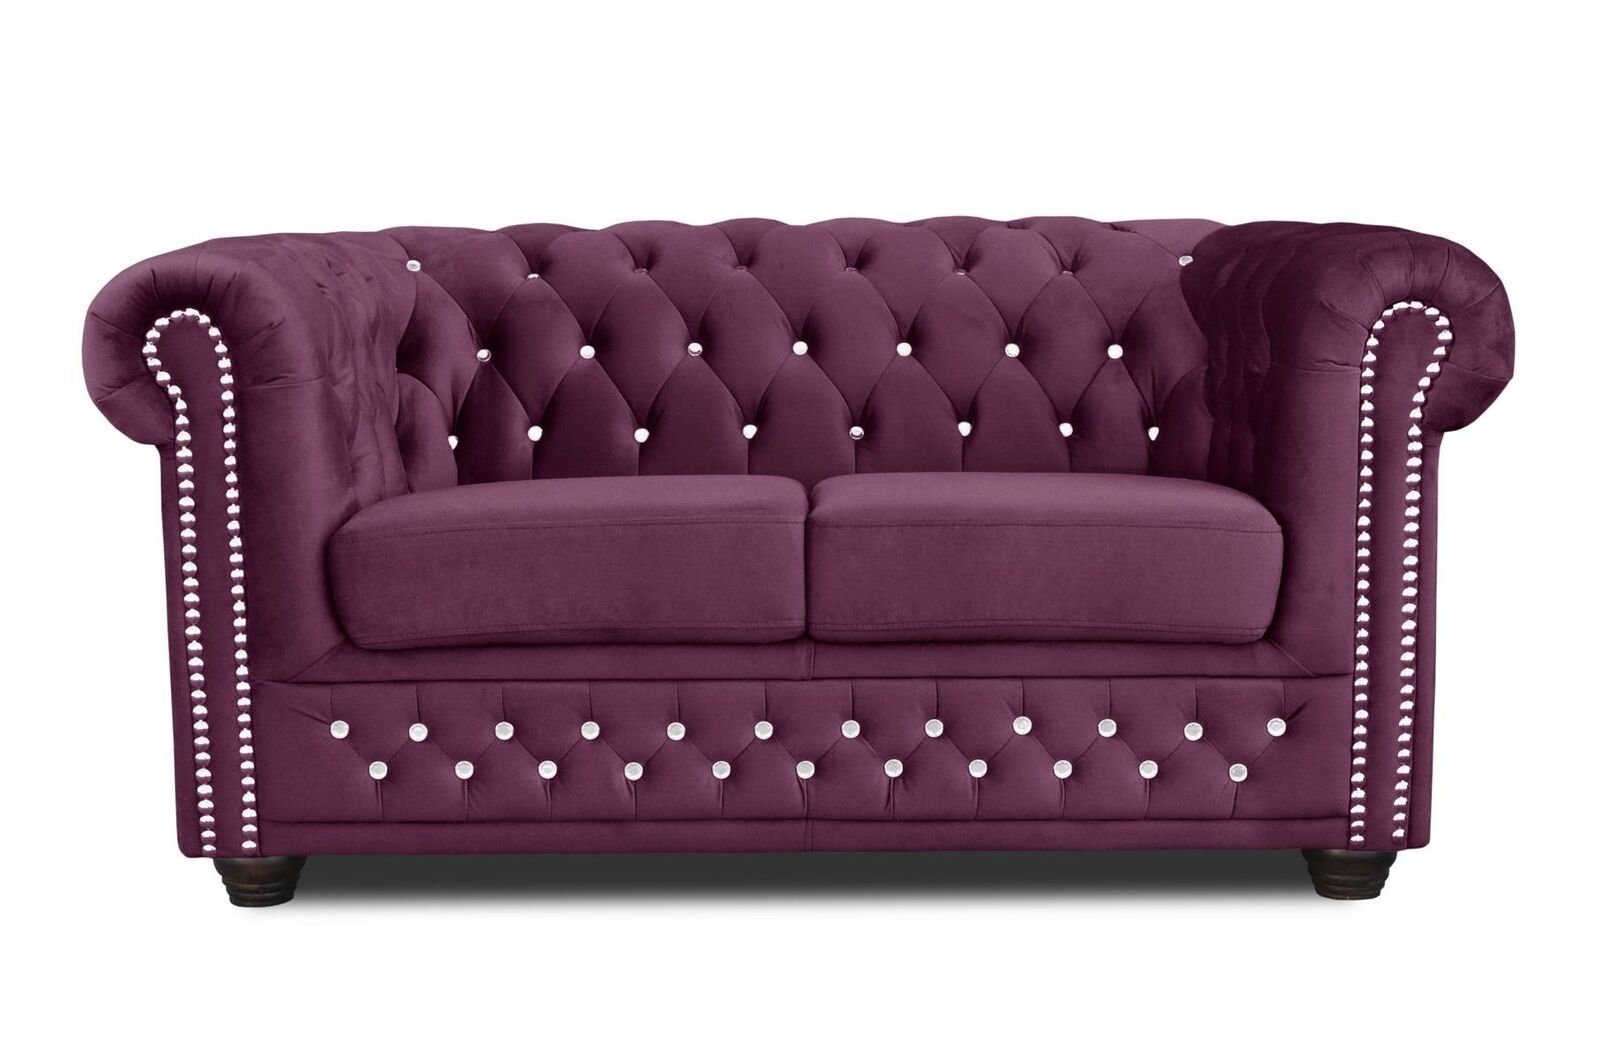 JVmoebel Sofa Lila Chesterfield Zweisitzer Textil Couch Polster 2Sitzer Stoff Sofa, Made in Europe